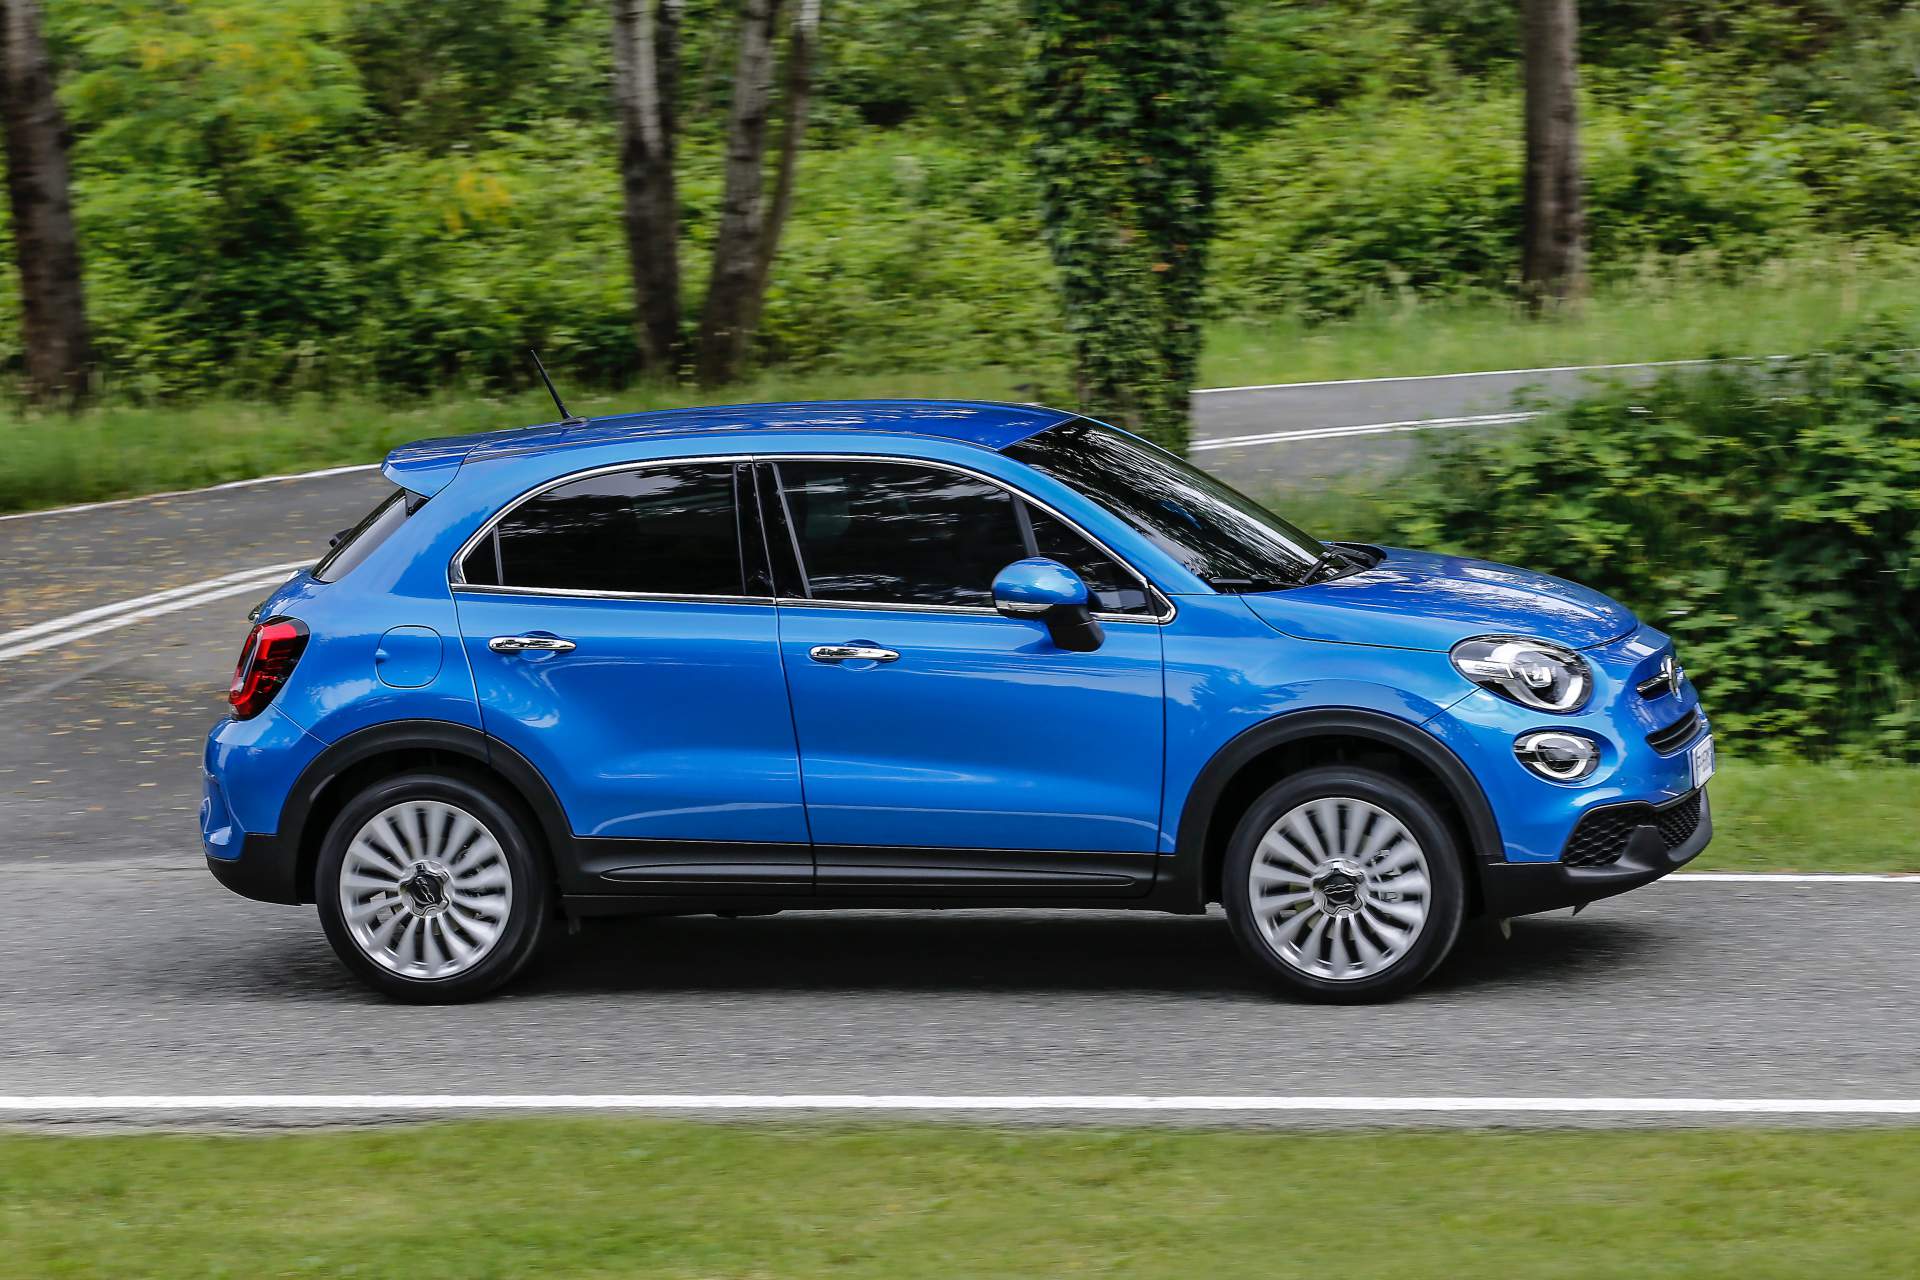 2019 Fiat 500X Breaks Cover With New Turbo Engines, Subtle